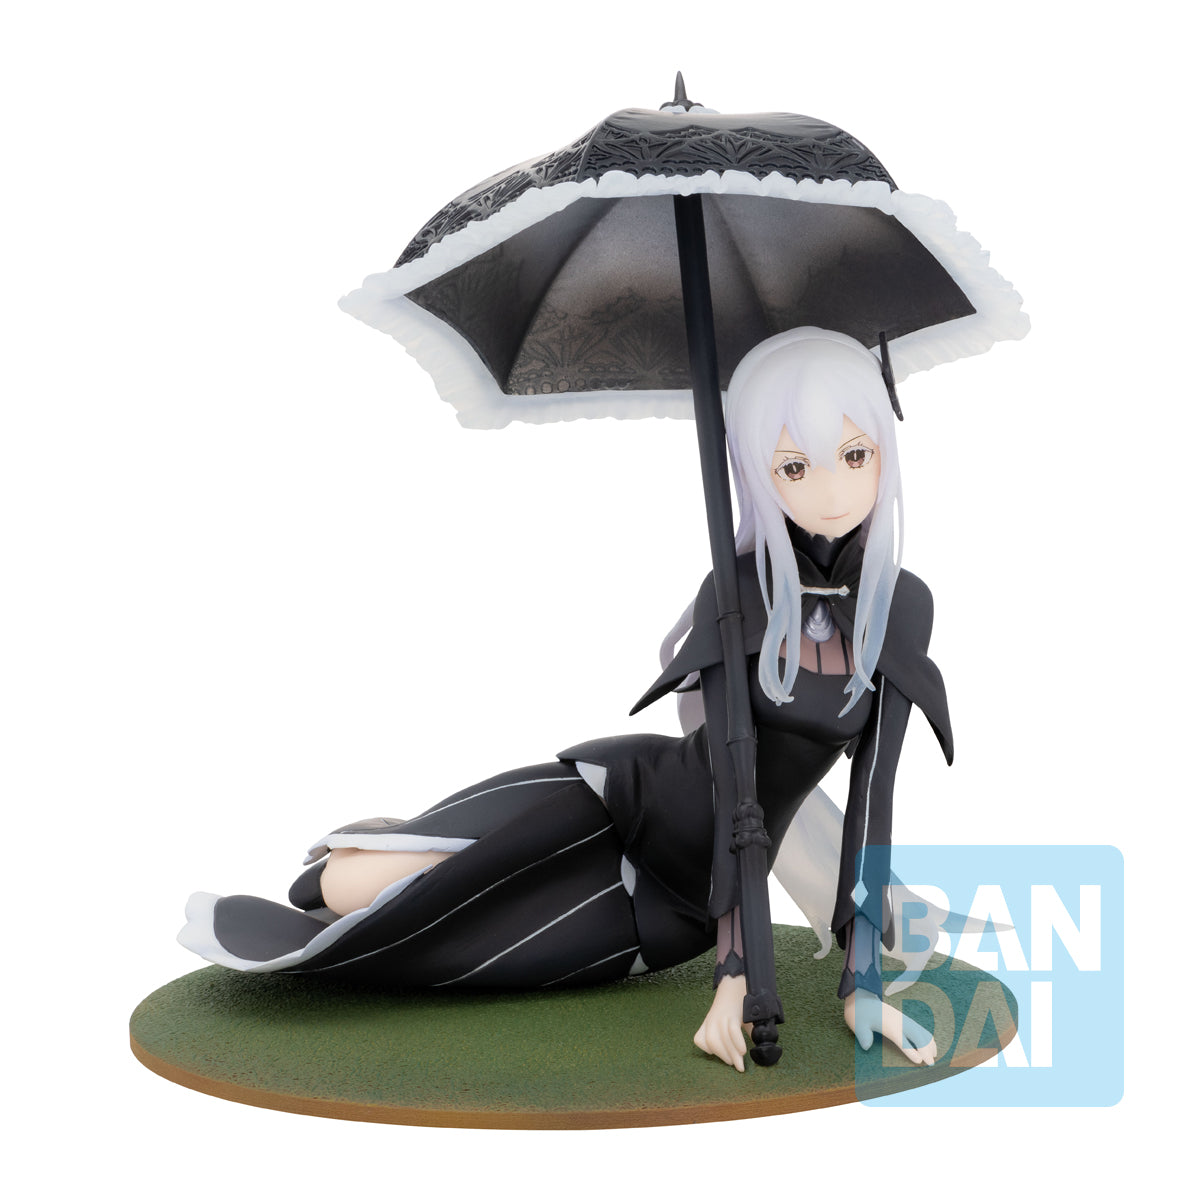 ECHIDNA (MAY THE SPIRIT BLESS YOU) "Re:Zero -Starting Life in Another World Figure